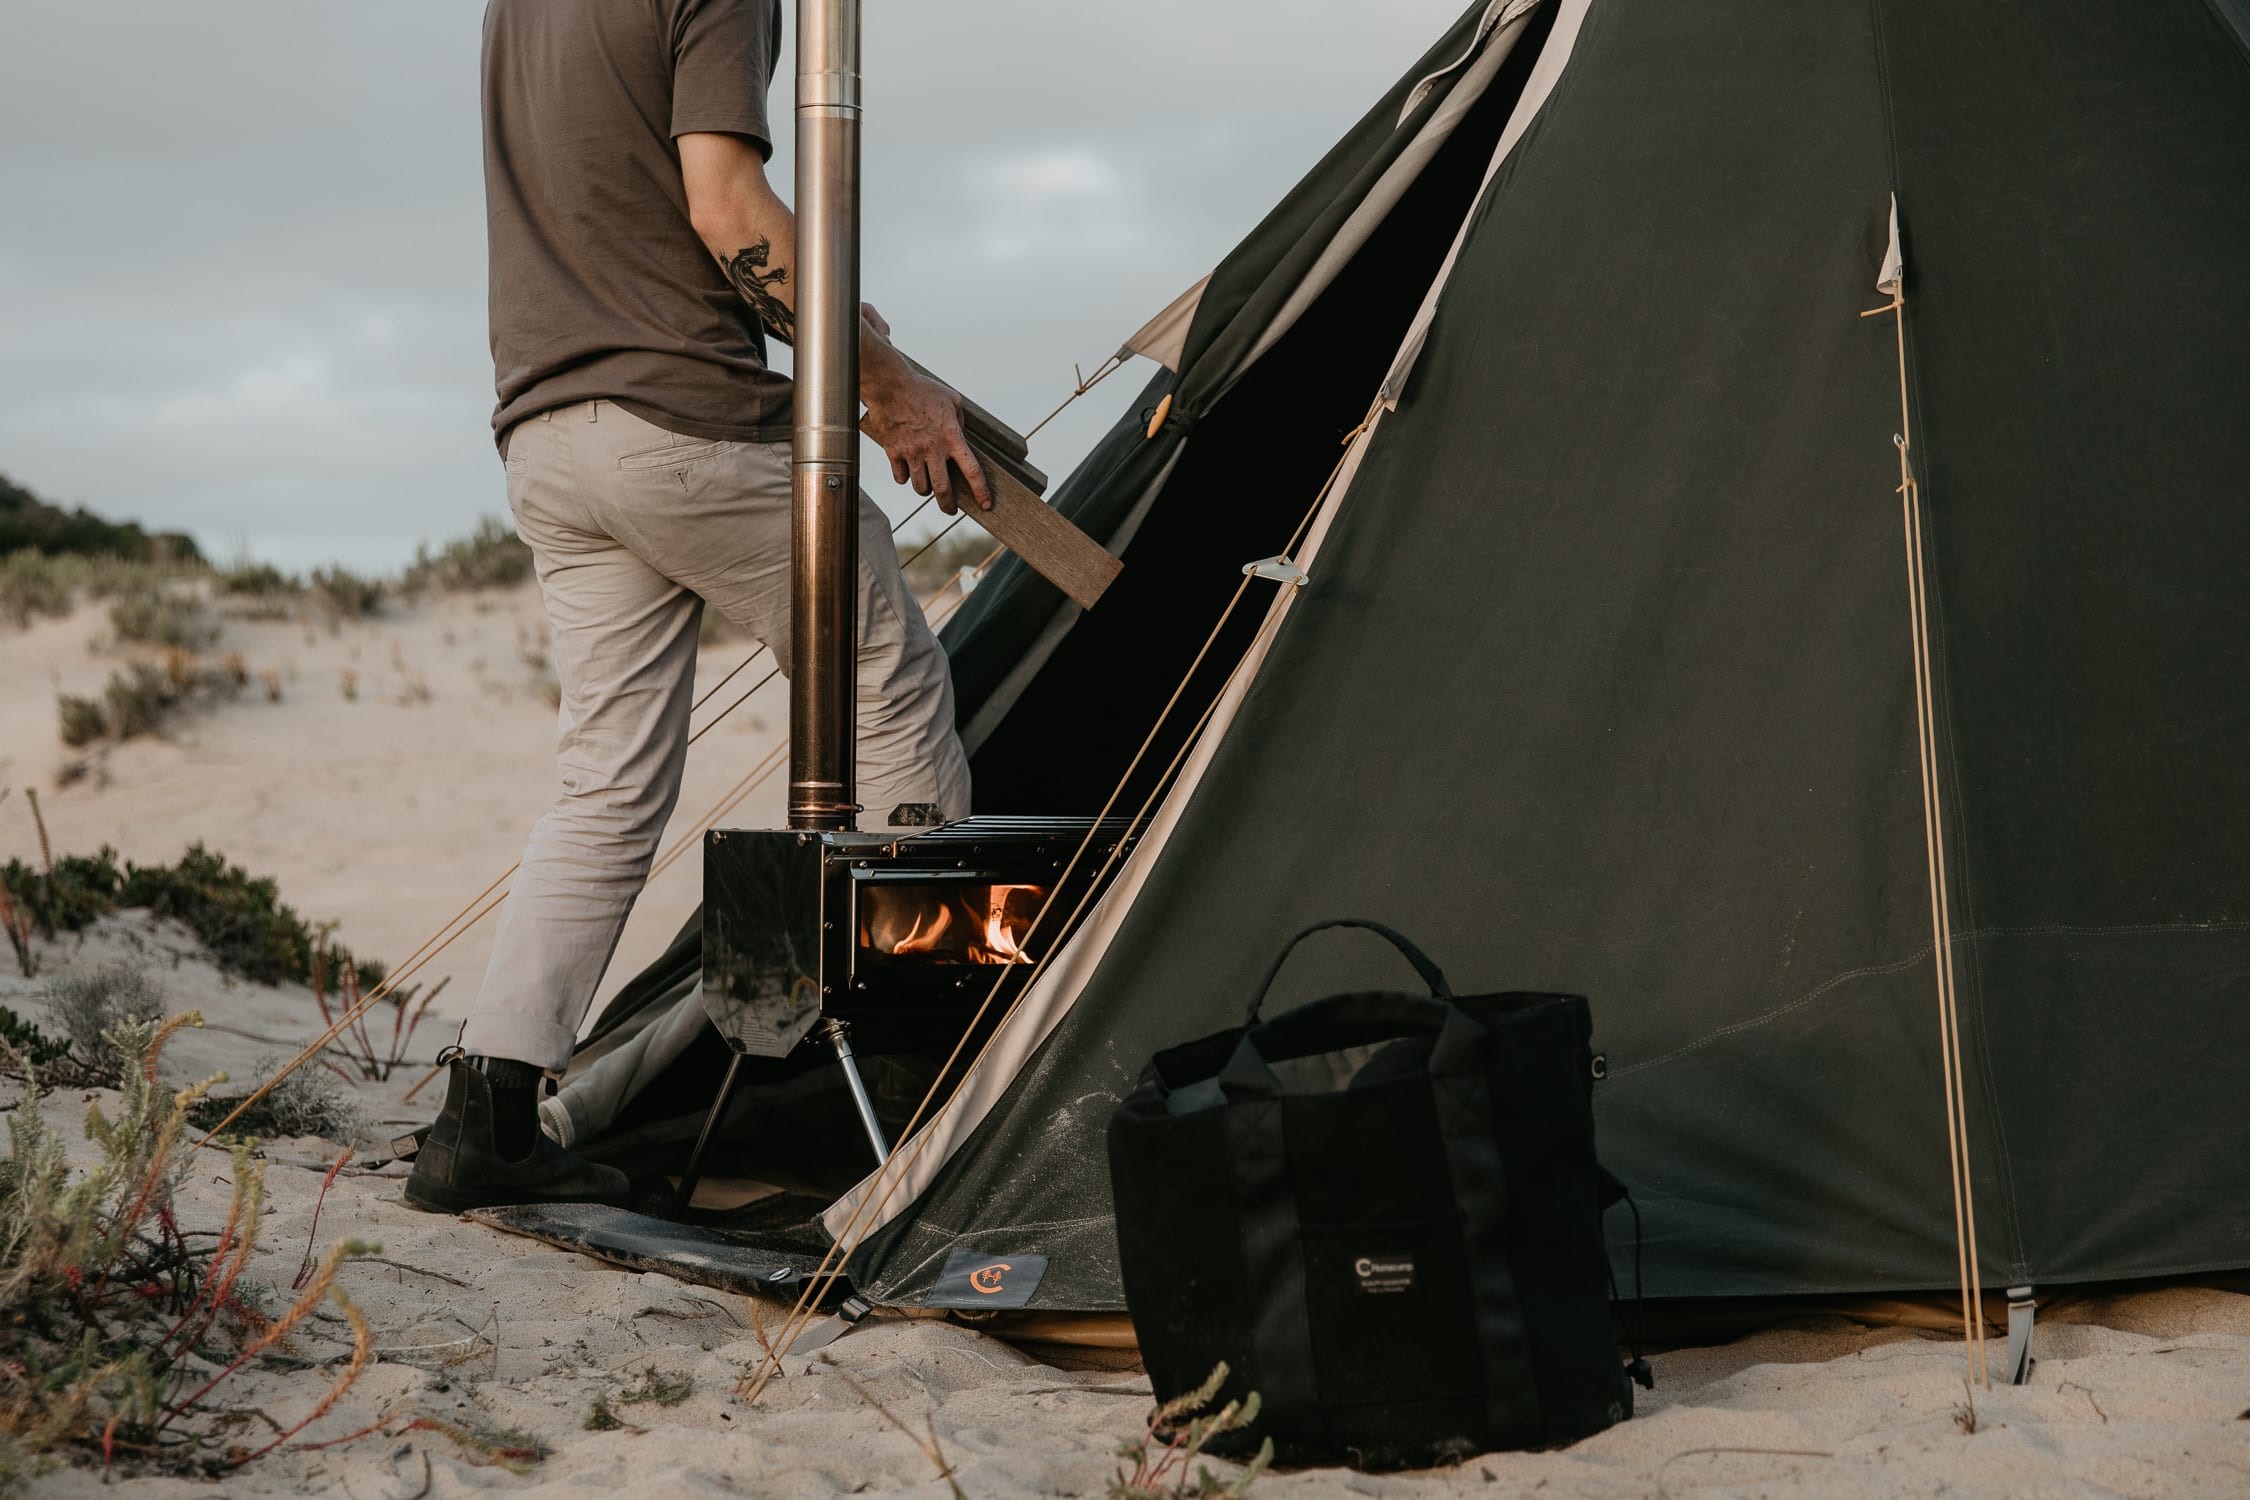 How To Hot Tent: A Guide To Camping With A Portable Wood Burning Stove |  Homecamp